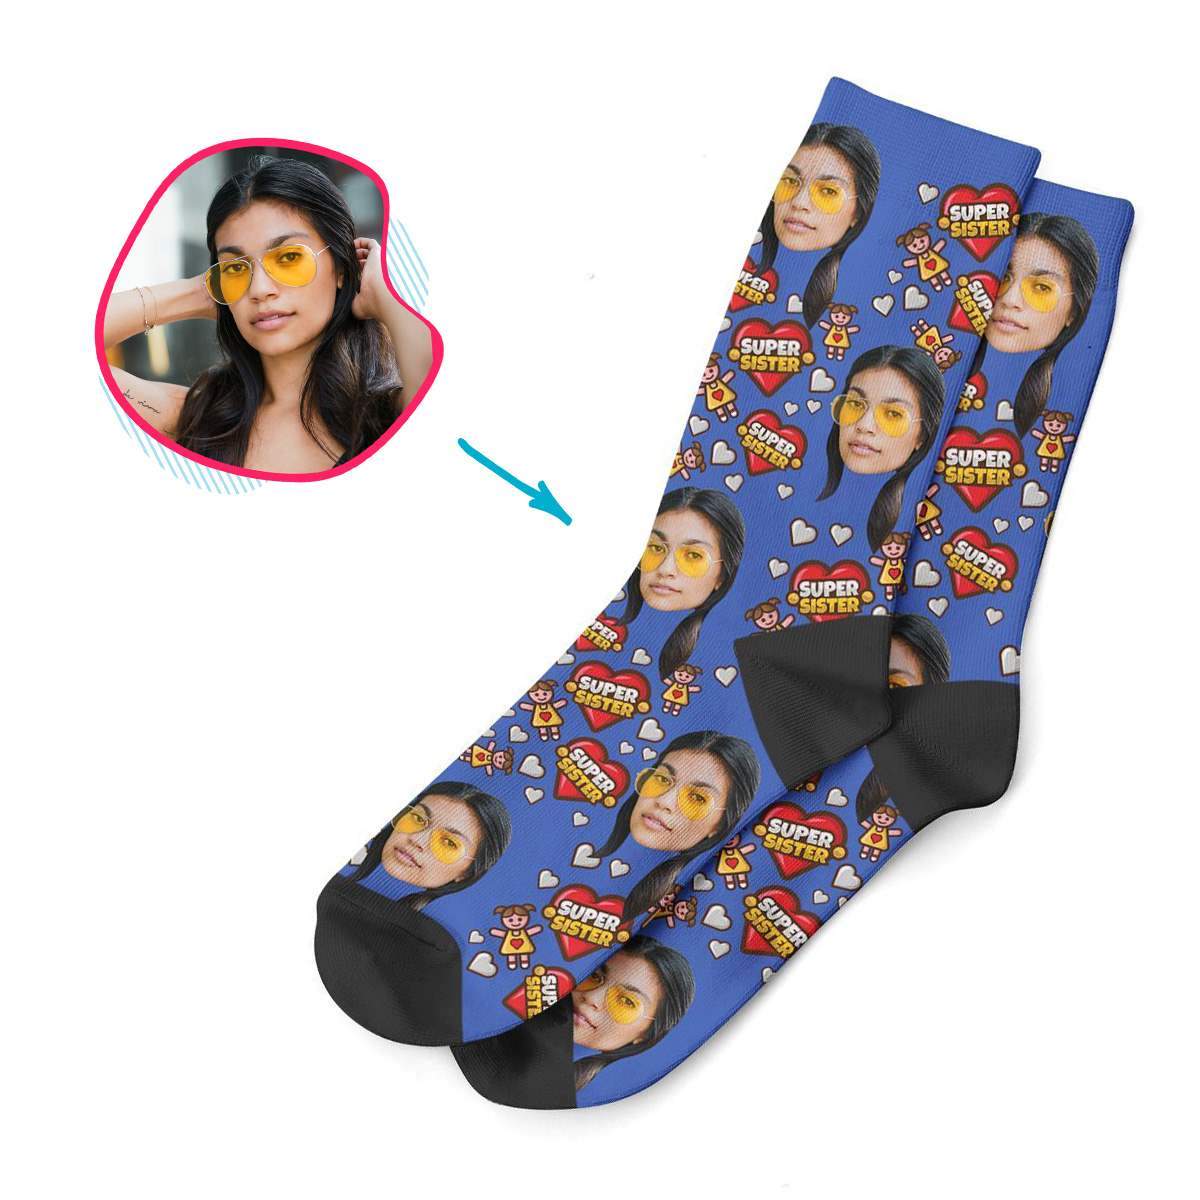 red Super Sister socks personalized with photo of face printed on them